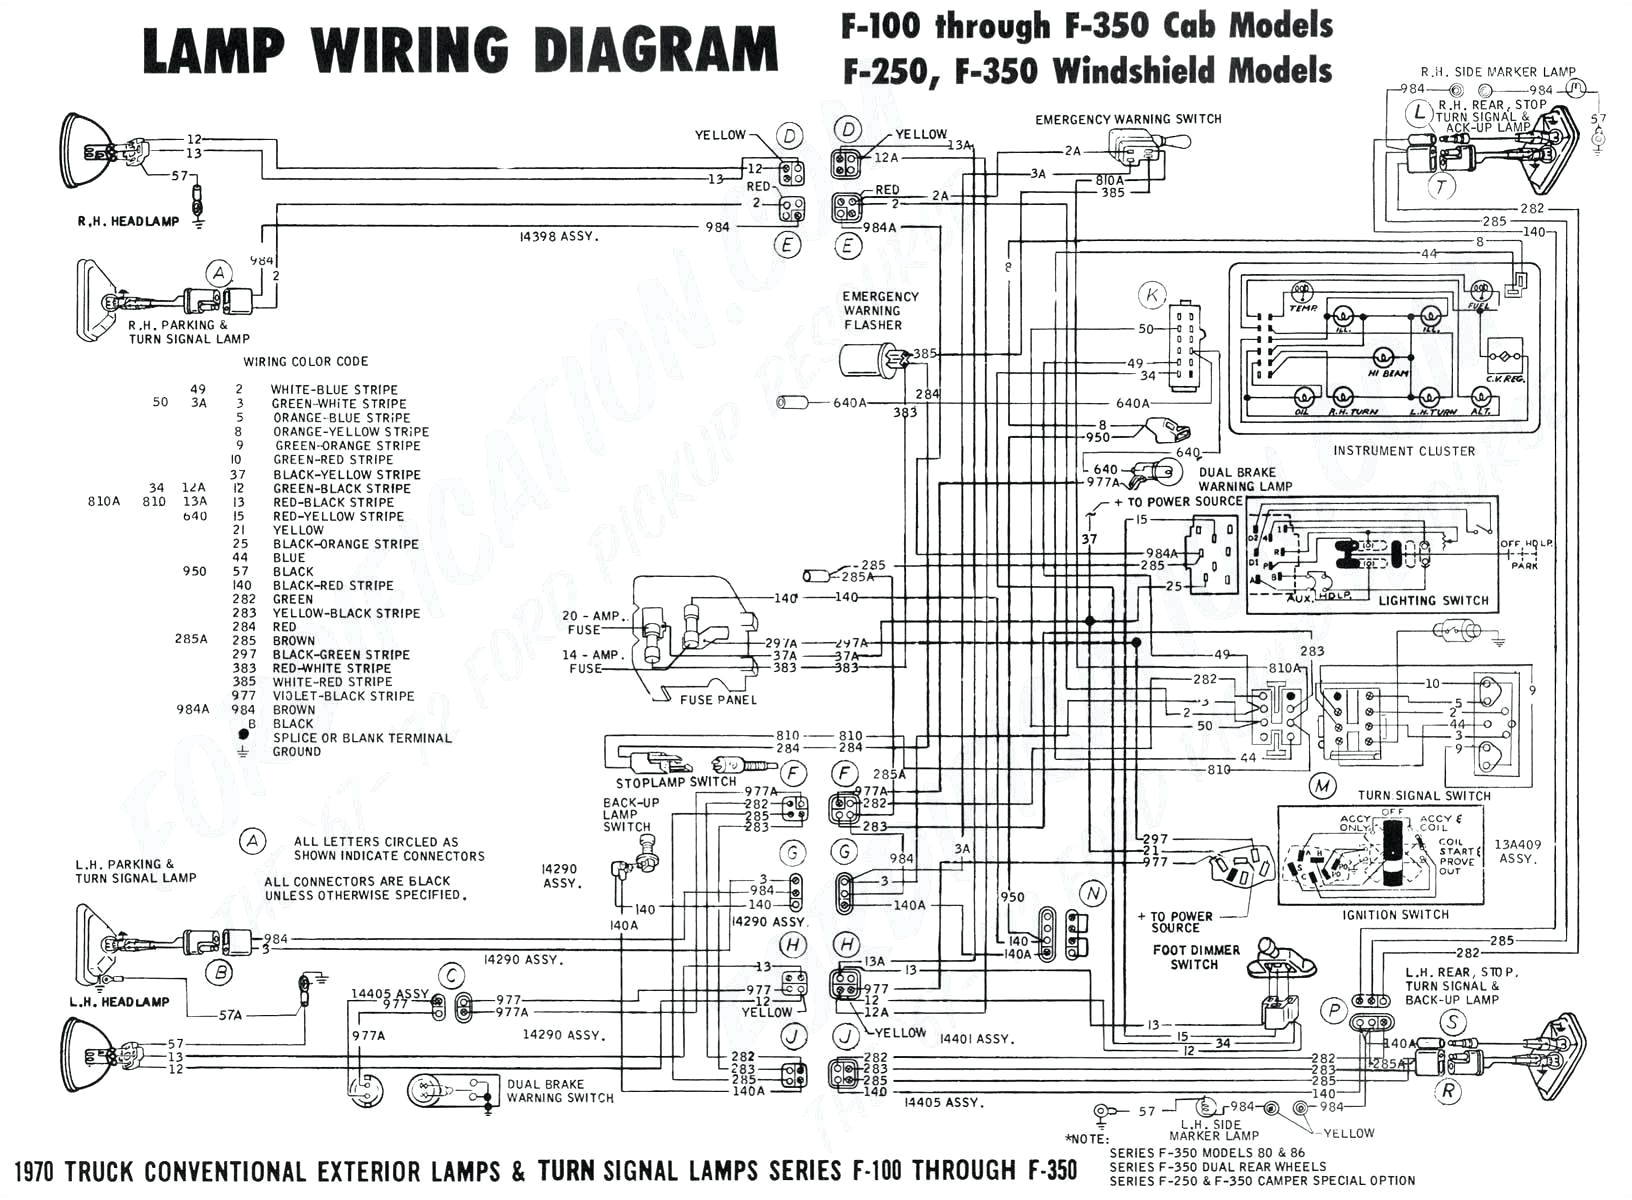 wiring diagram for ford f250 wiring diagram expert 2002 ford f 250 wiring schematic